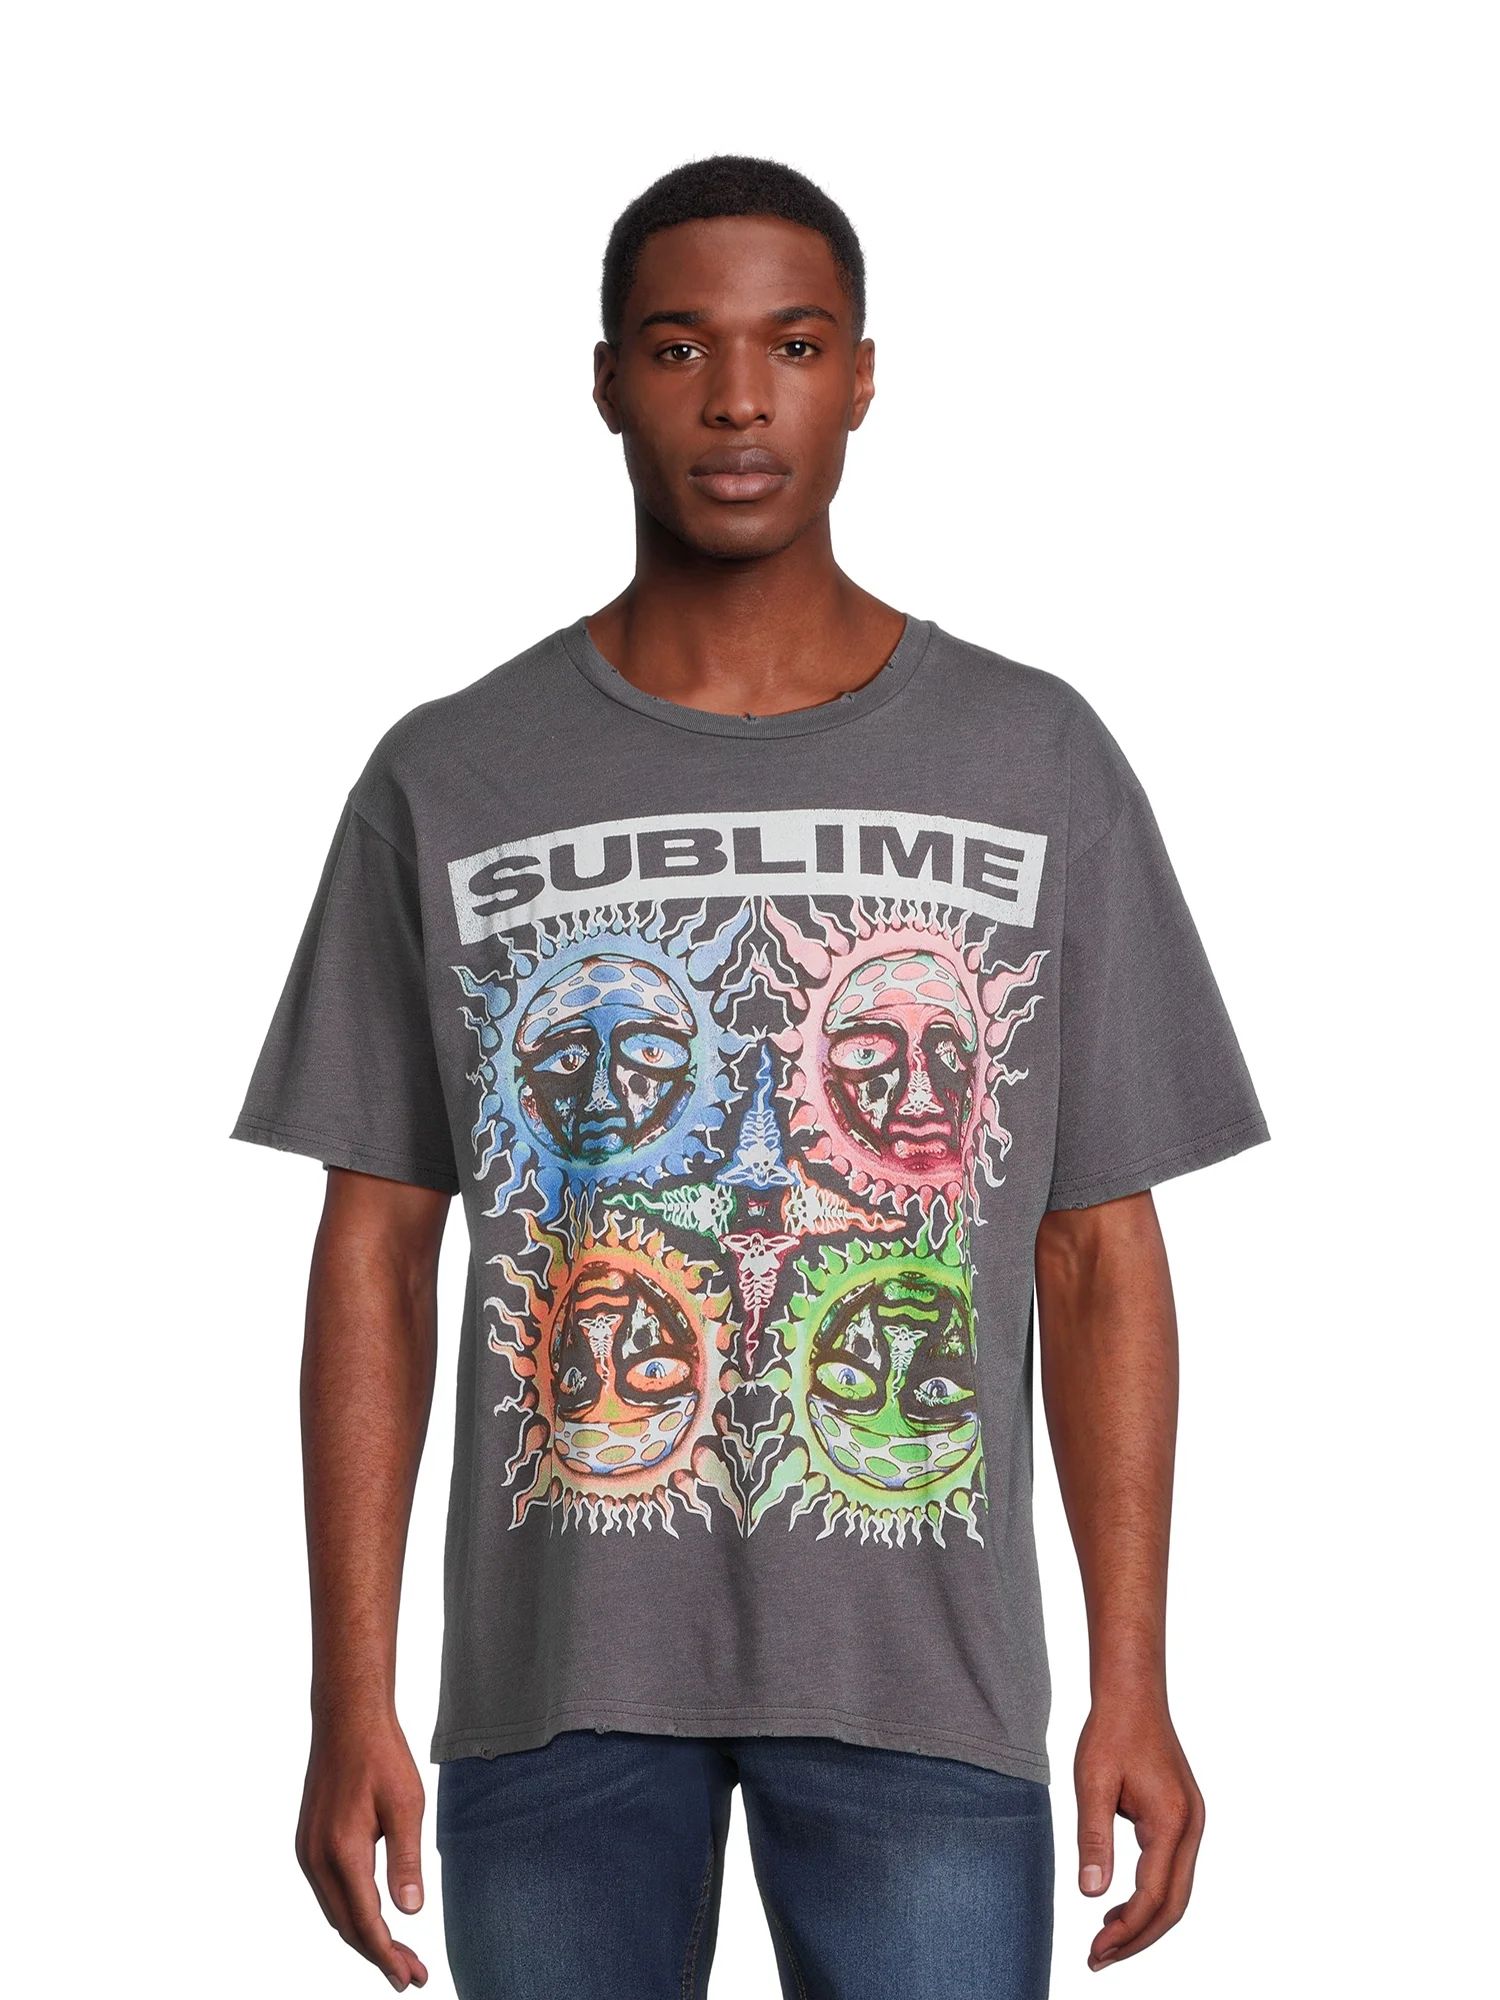 Sublime Men's Graphic Band Tee with Short Sleeves, Sizes XS-3XL | Walmart (US)